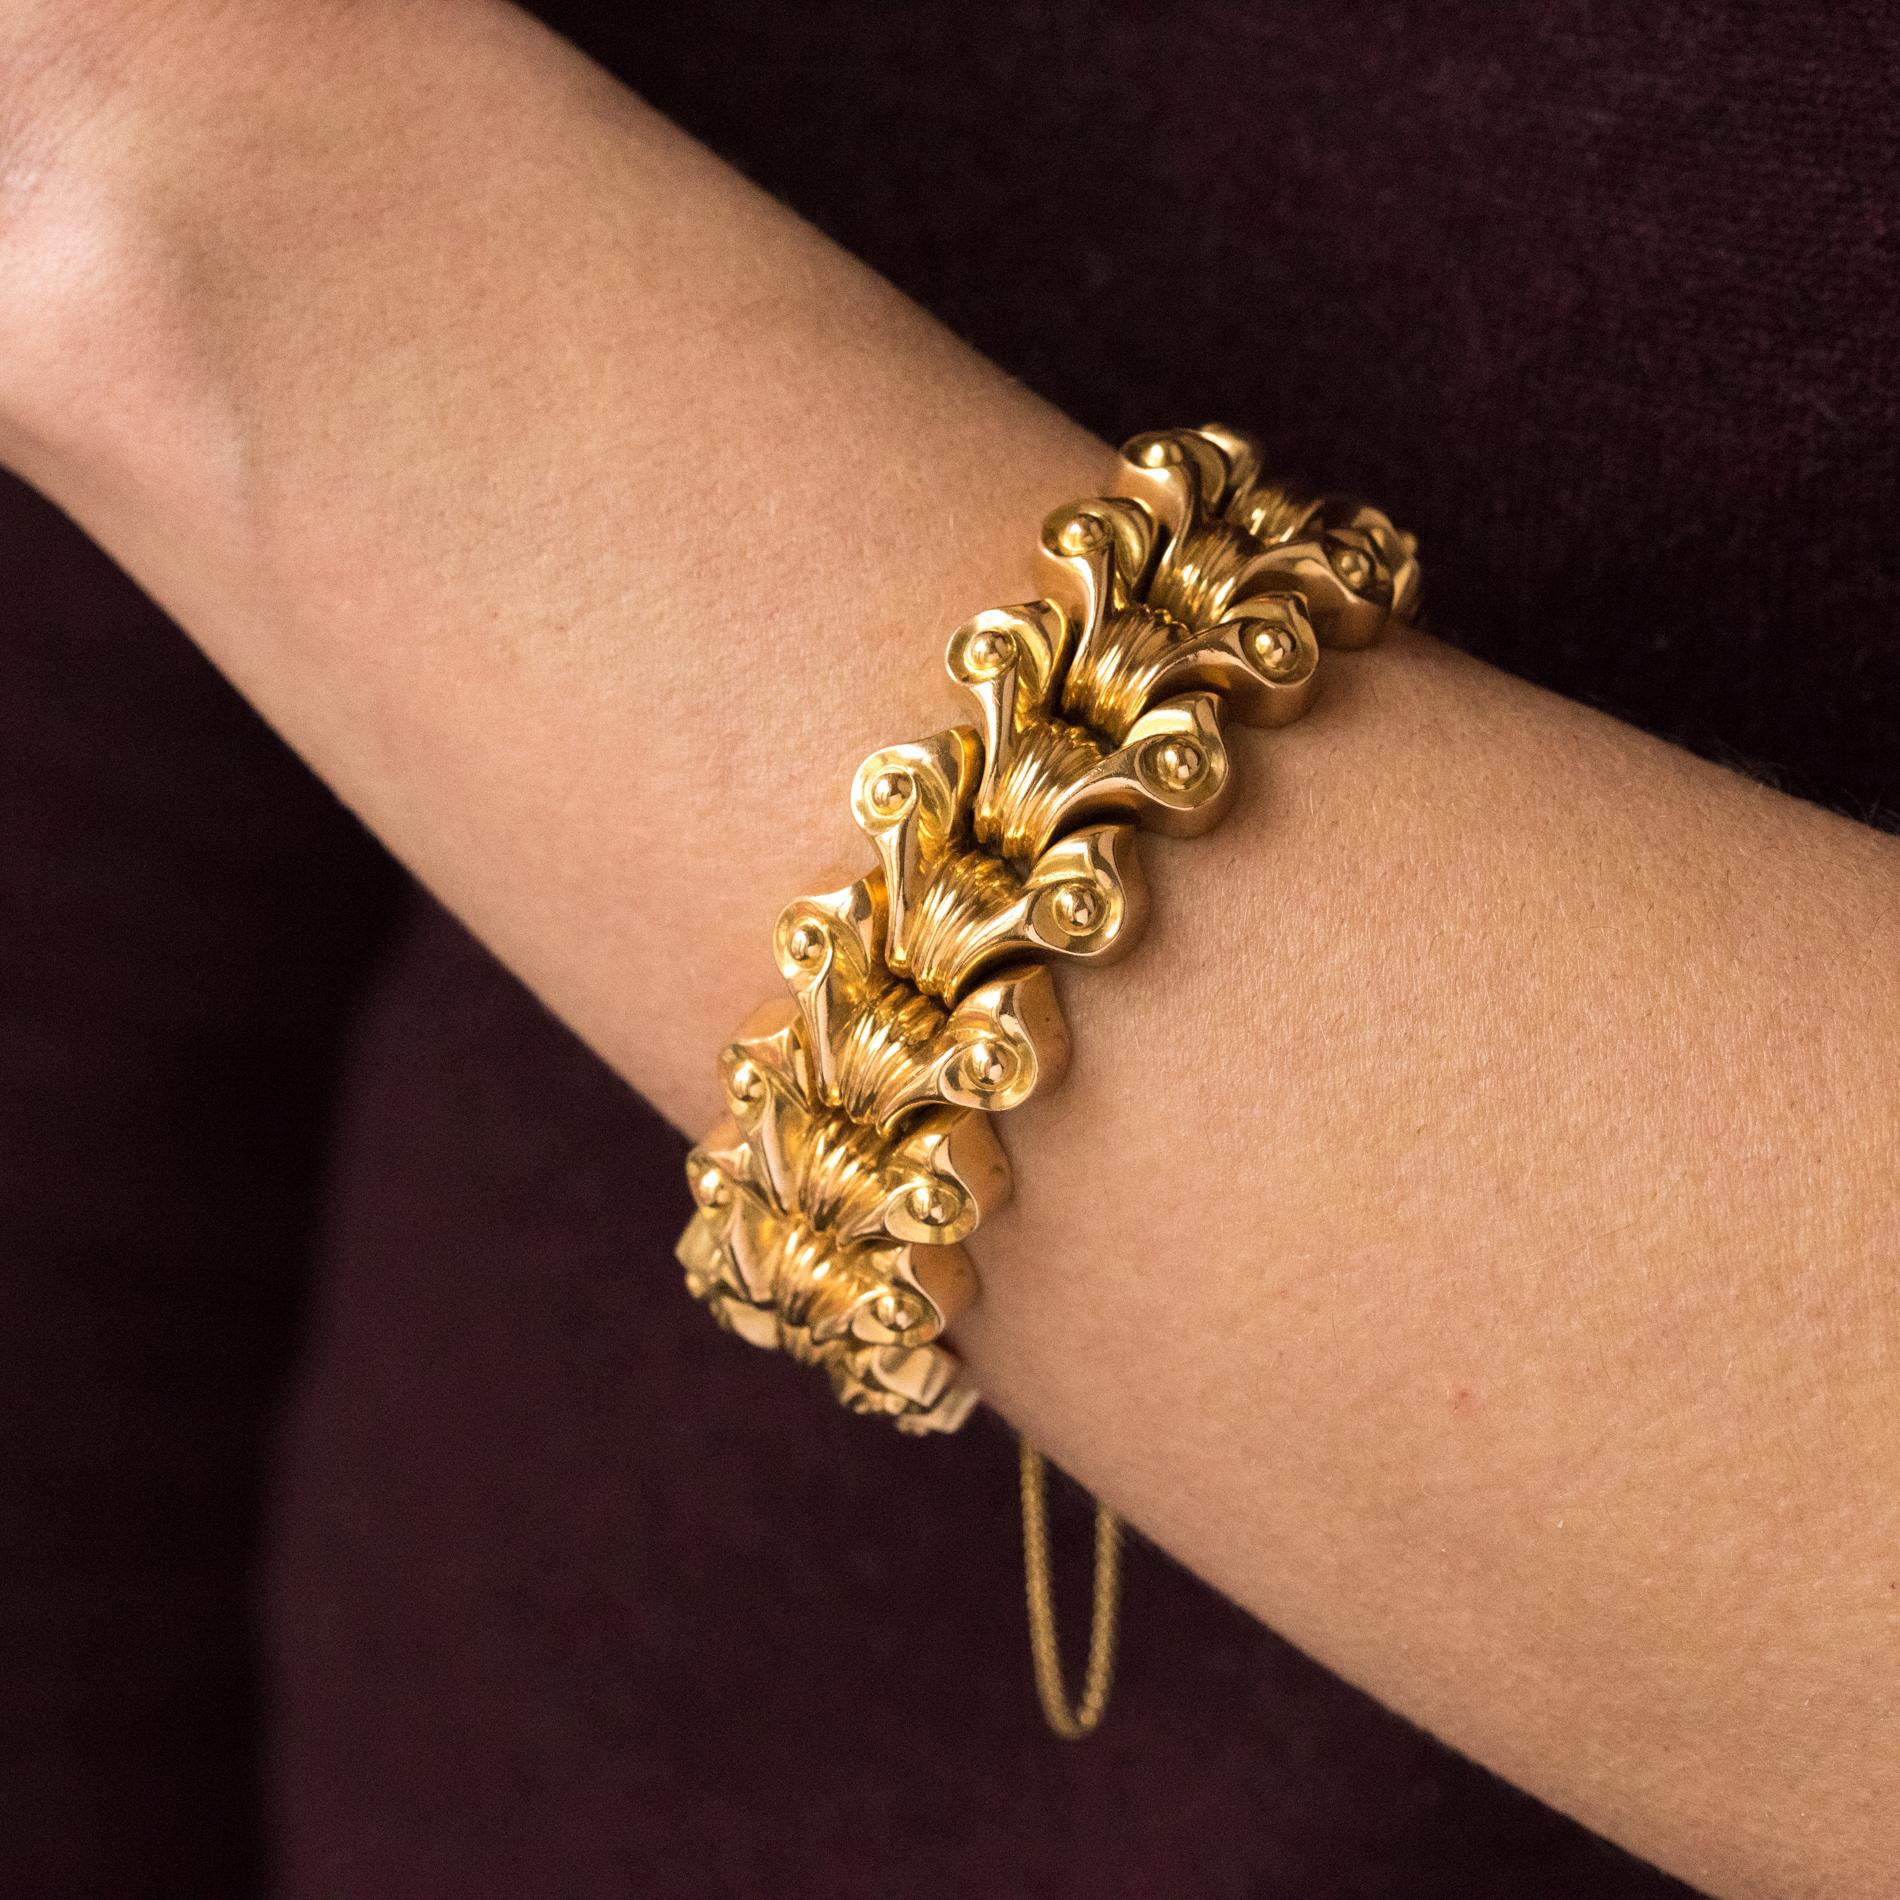 Bracelet in 18 carat yellow gold, eagle head hallmark. 
Composed of 17 scroll motifs, with a decoration of lines and golden beads, linked together. The clasp is an 8 shaped ratchet with safety chain. 
Internal Diameter: 5.5 cm, total length: 22.5